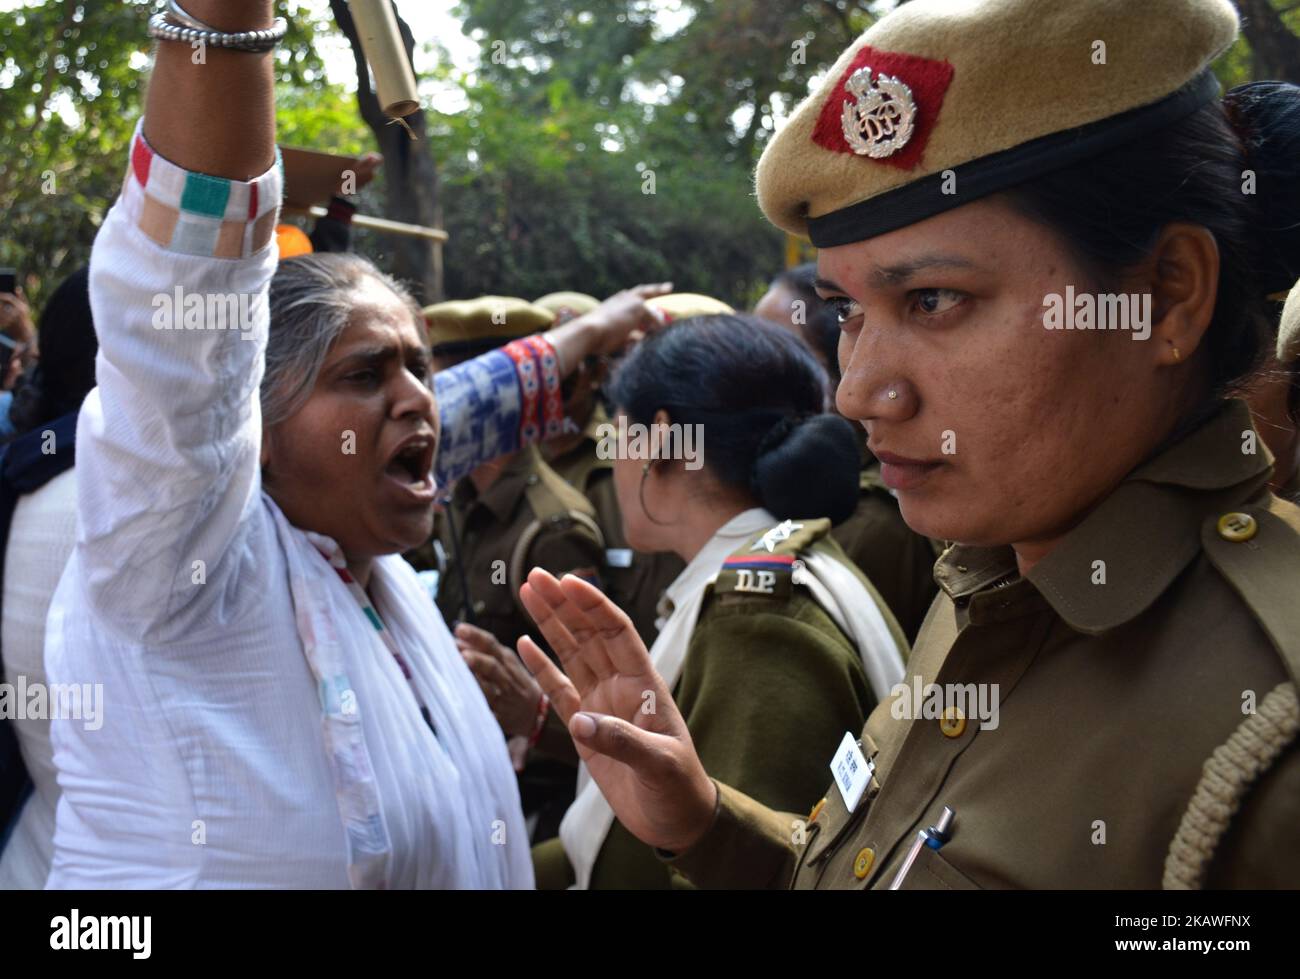 A protestor is stopped by Delhi police constables as she marches towards Delhi police barracades demanding justice for victims in the 1984 Anti-Sikh riots and arrest of Congress leader Jadgish Tytler for his alleged involvement in the 1984 anti-Sikh riots in New Delhi on 9th February, 2018. (Photo by Sahiba Chawdhary/NurPhoto) Stock Photo